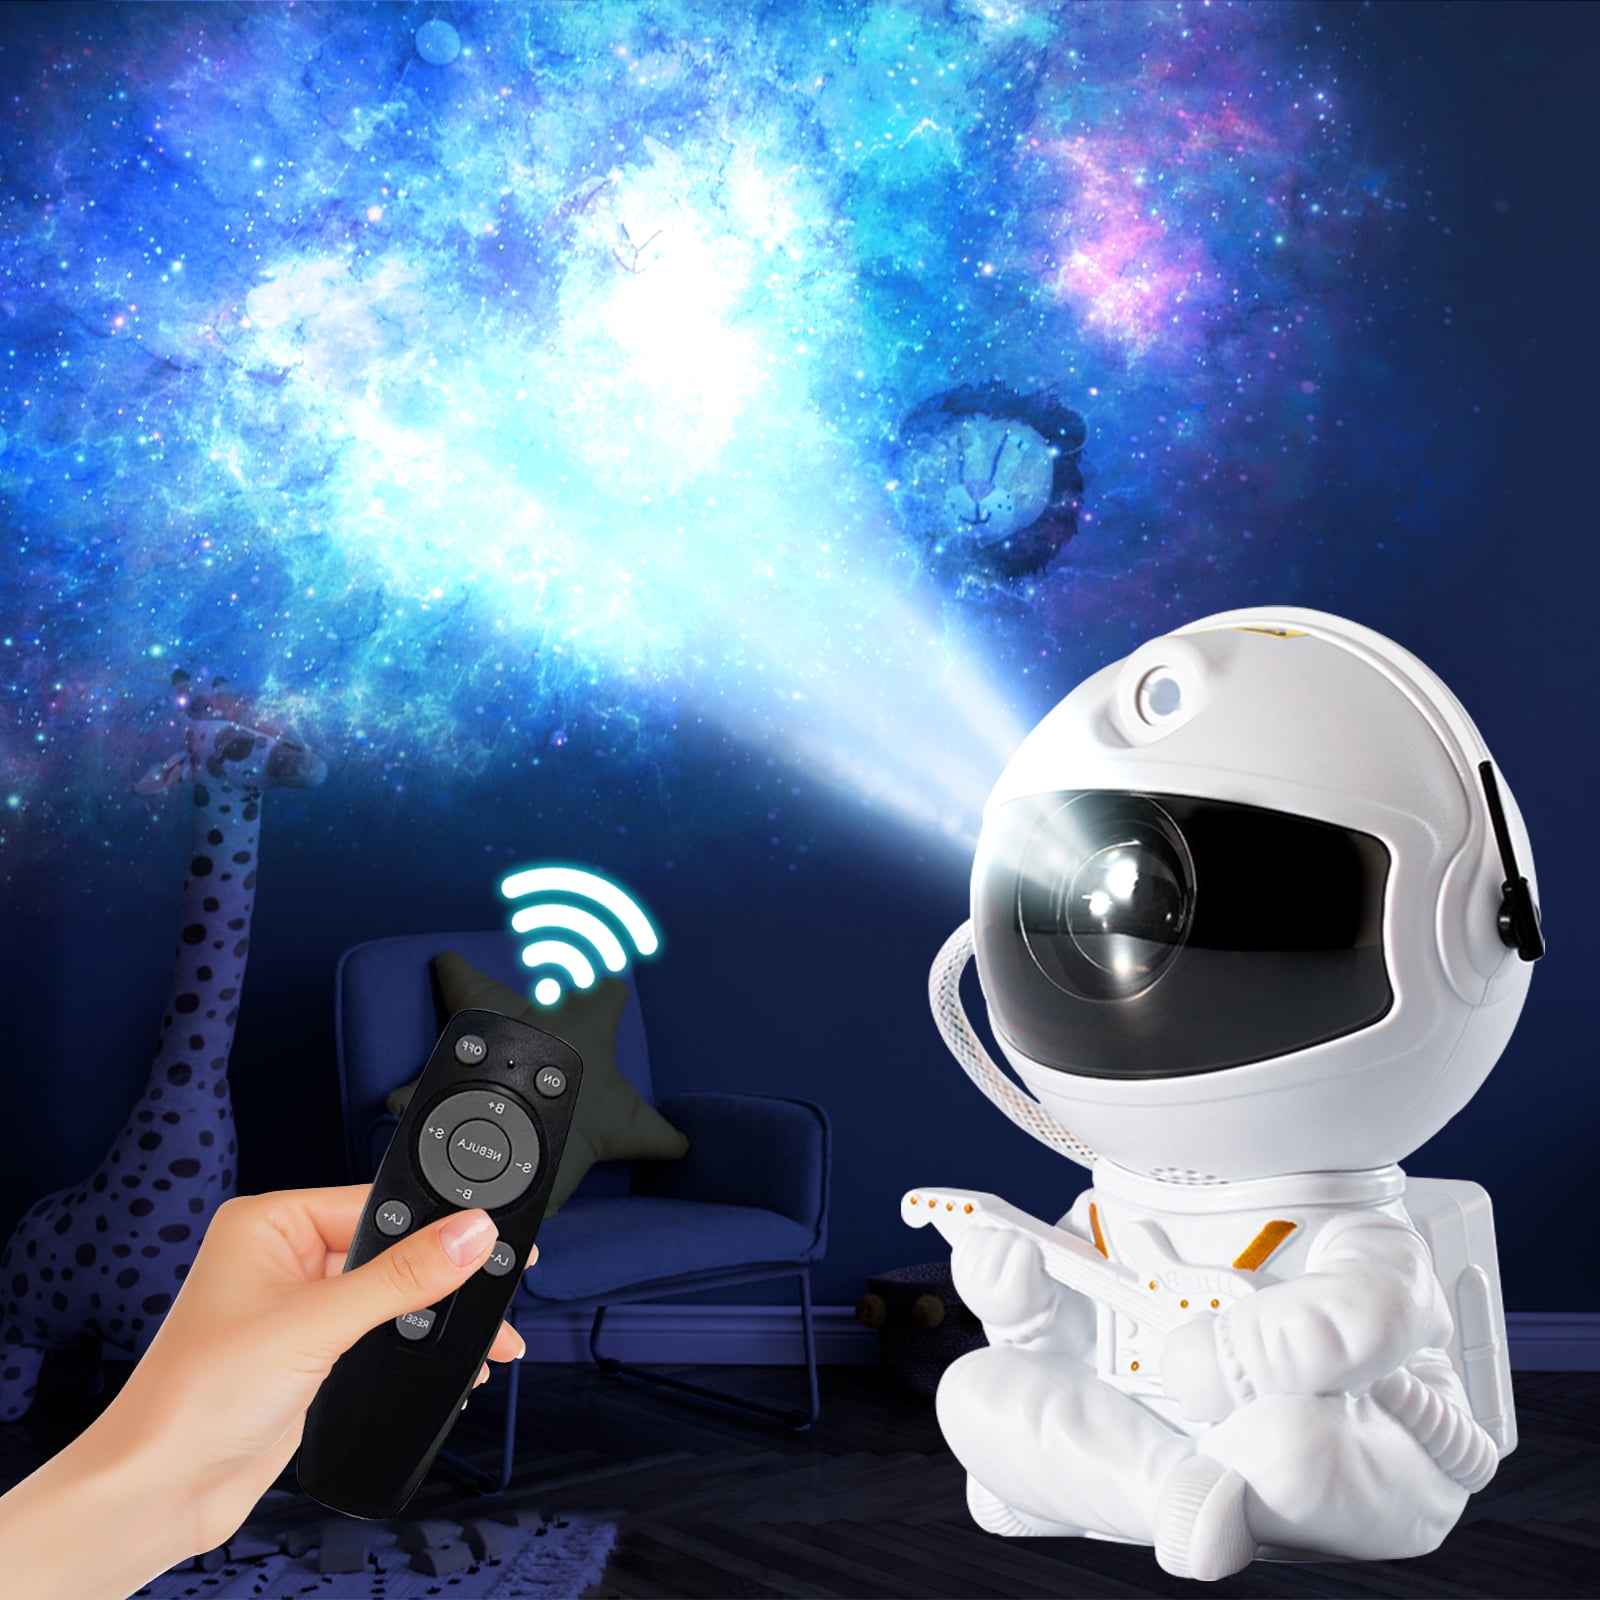 BM Ecom Starry Night Light Projector Astronaut LED Projection Lamp with  Remote Control, Adjustable Head Angle